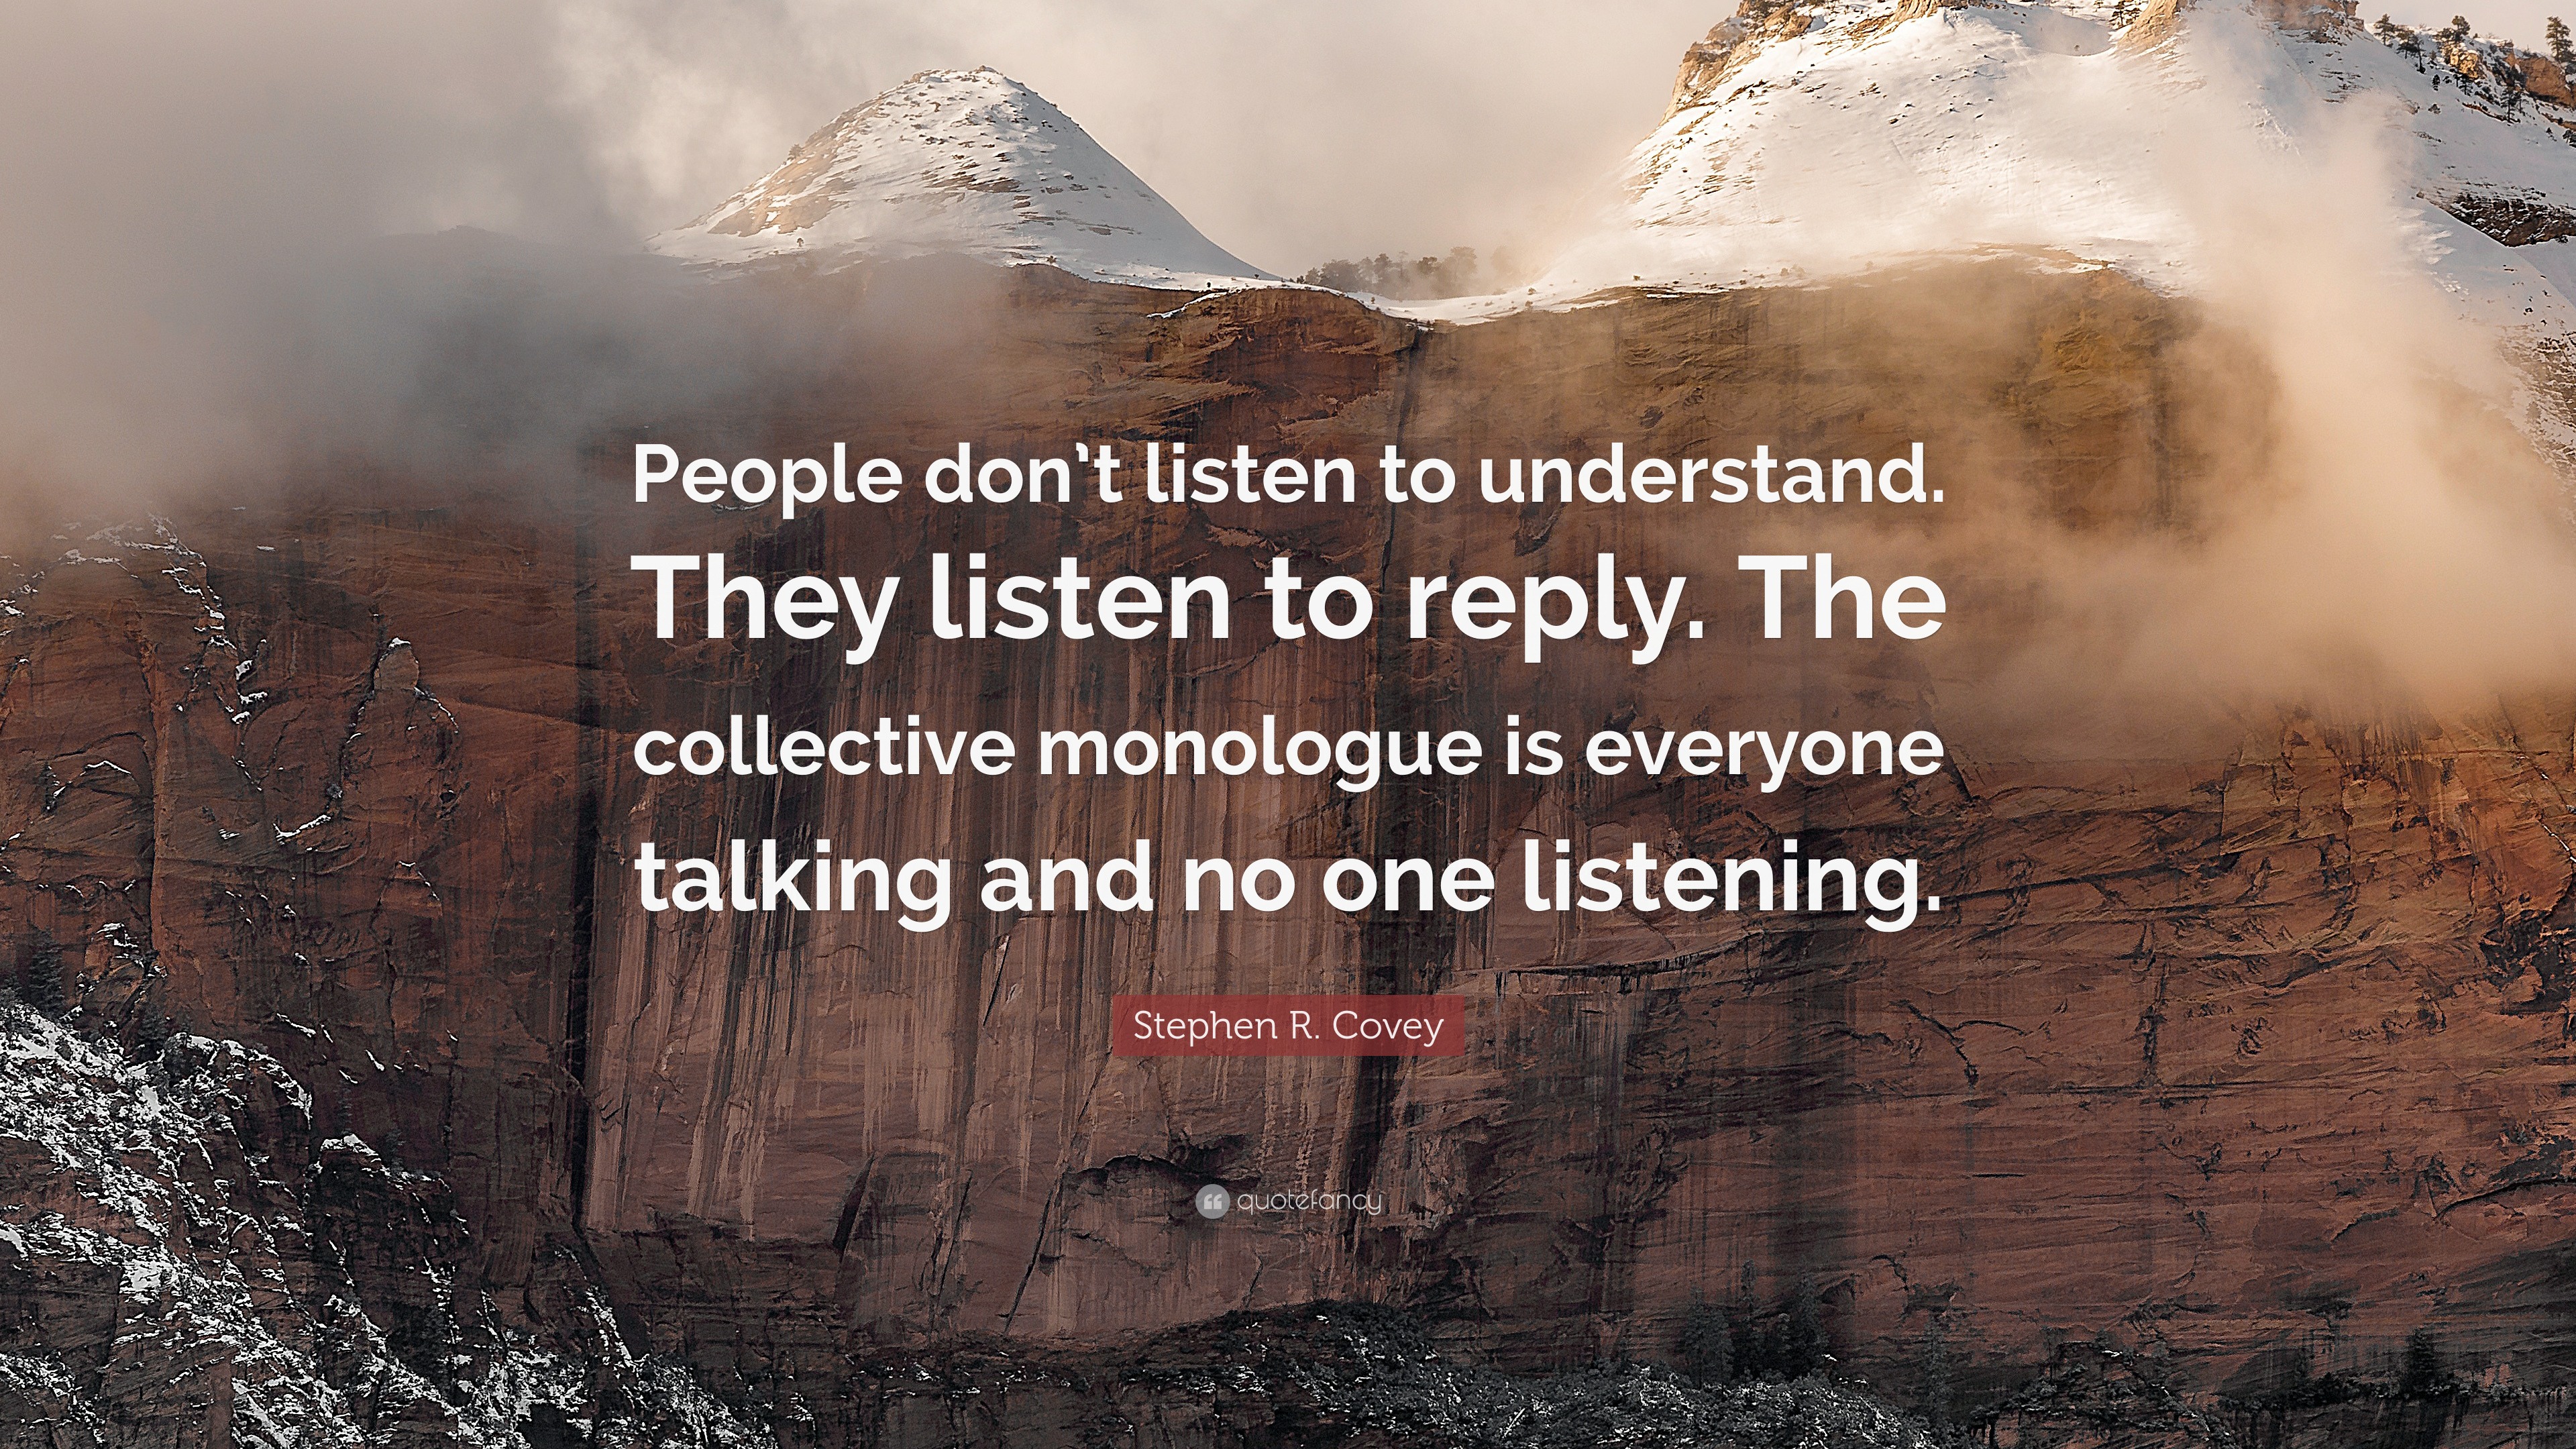 Stephen R. Covey Quote: “People don’t listen to understand. They listen